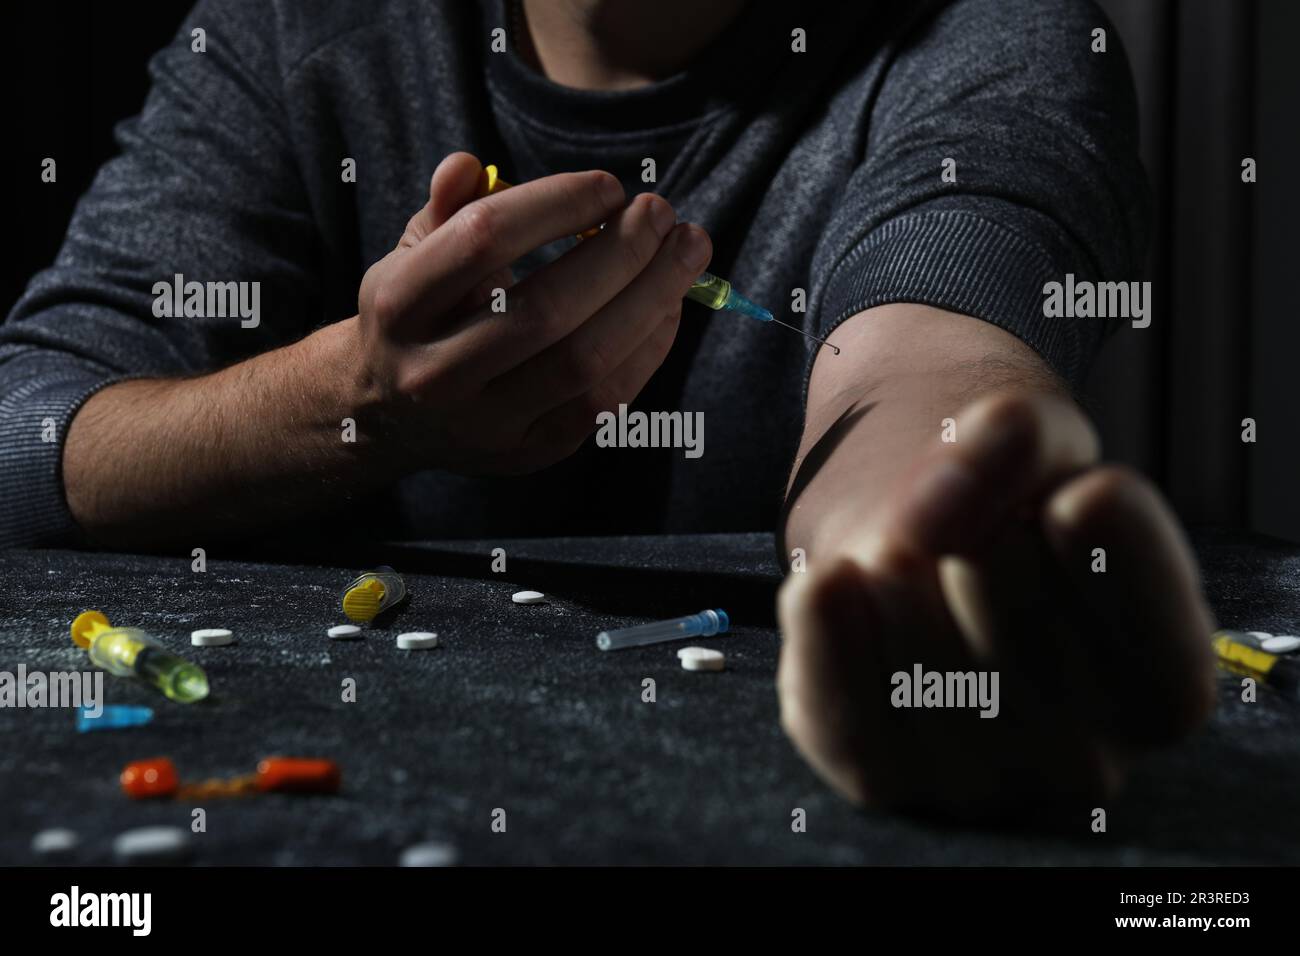 Addicted man taking drugs at black textured table, closeup Stock Photo